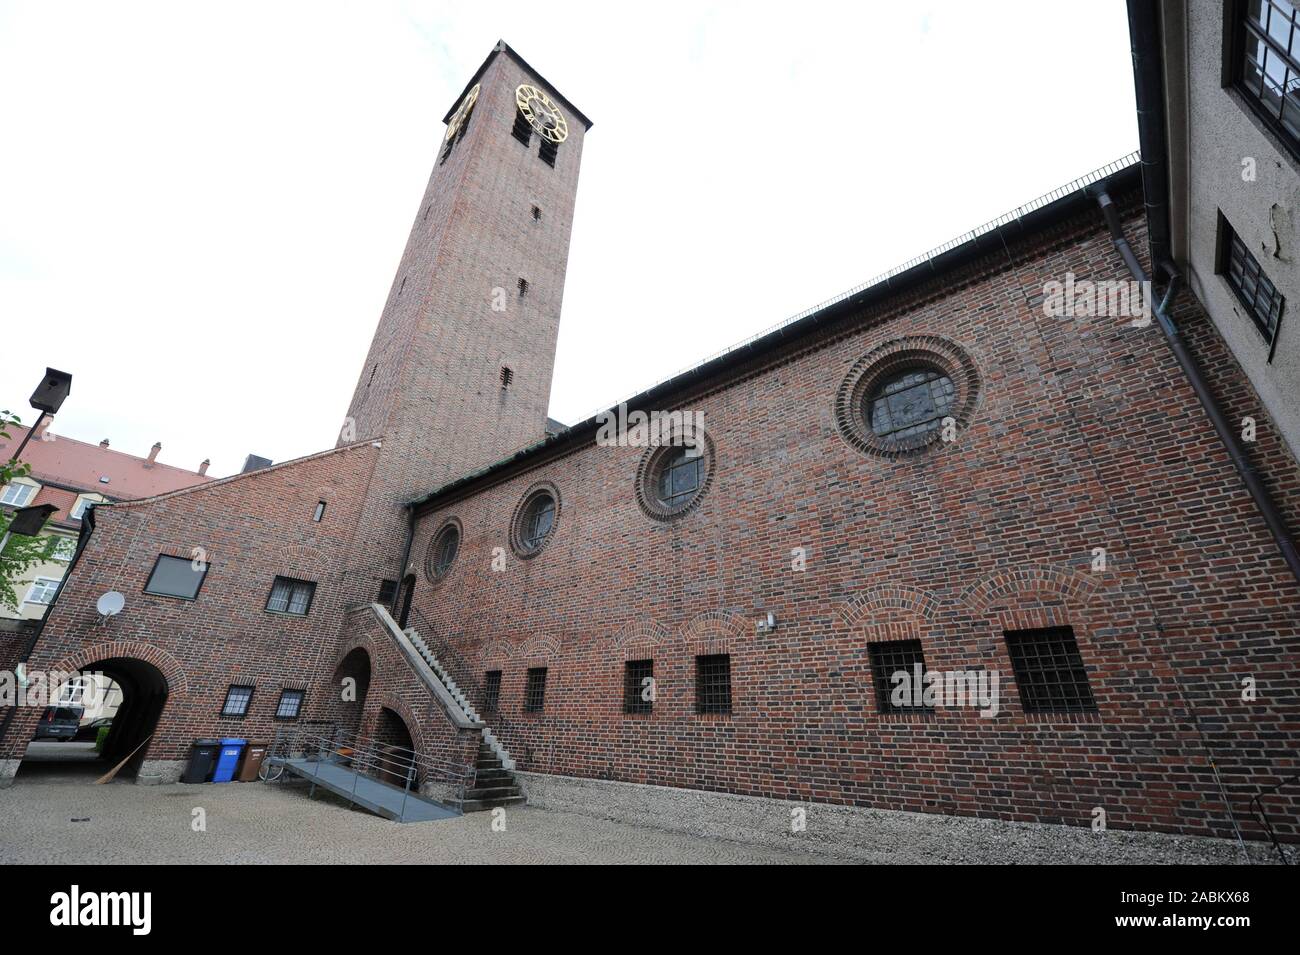 The Church of the Resurrection in Westend on Gollierstrasse. The church is to be opened for new uses. [automated translation] Stock Photo